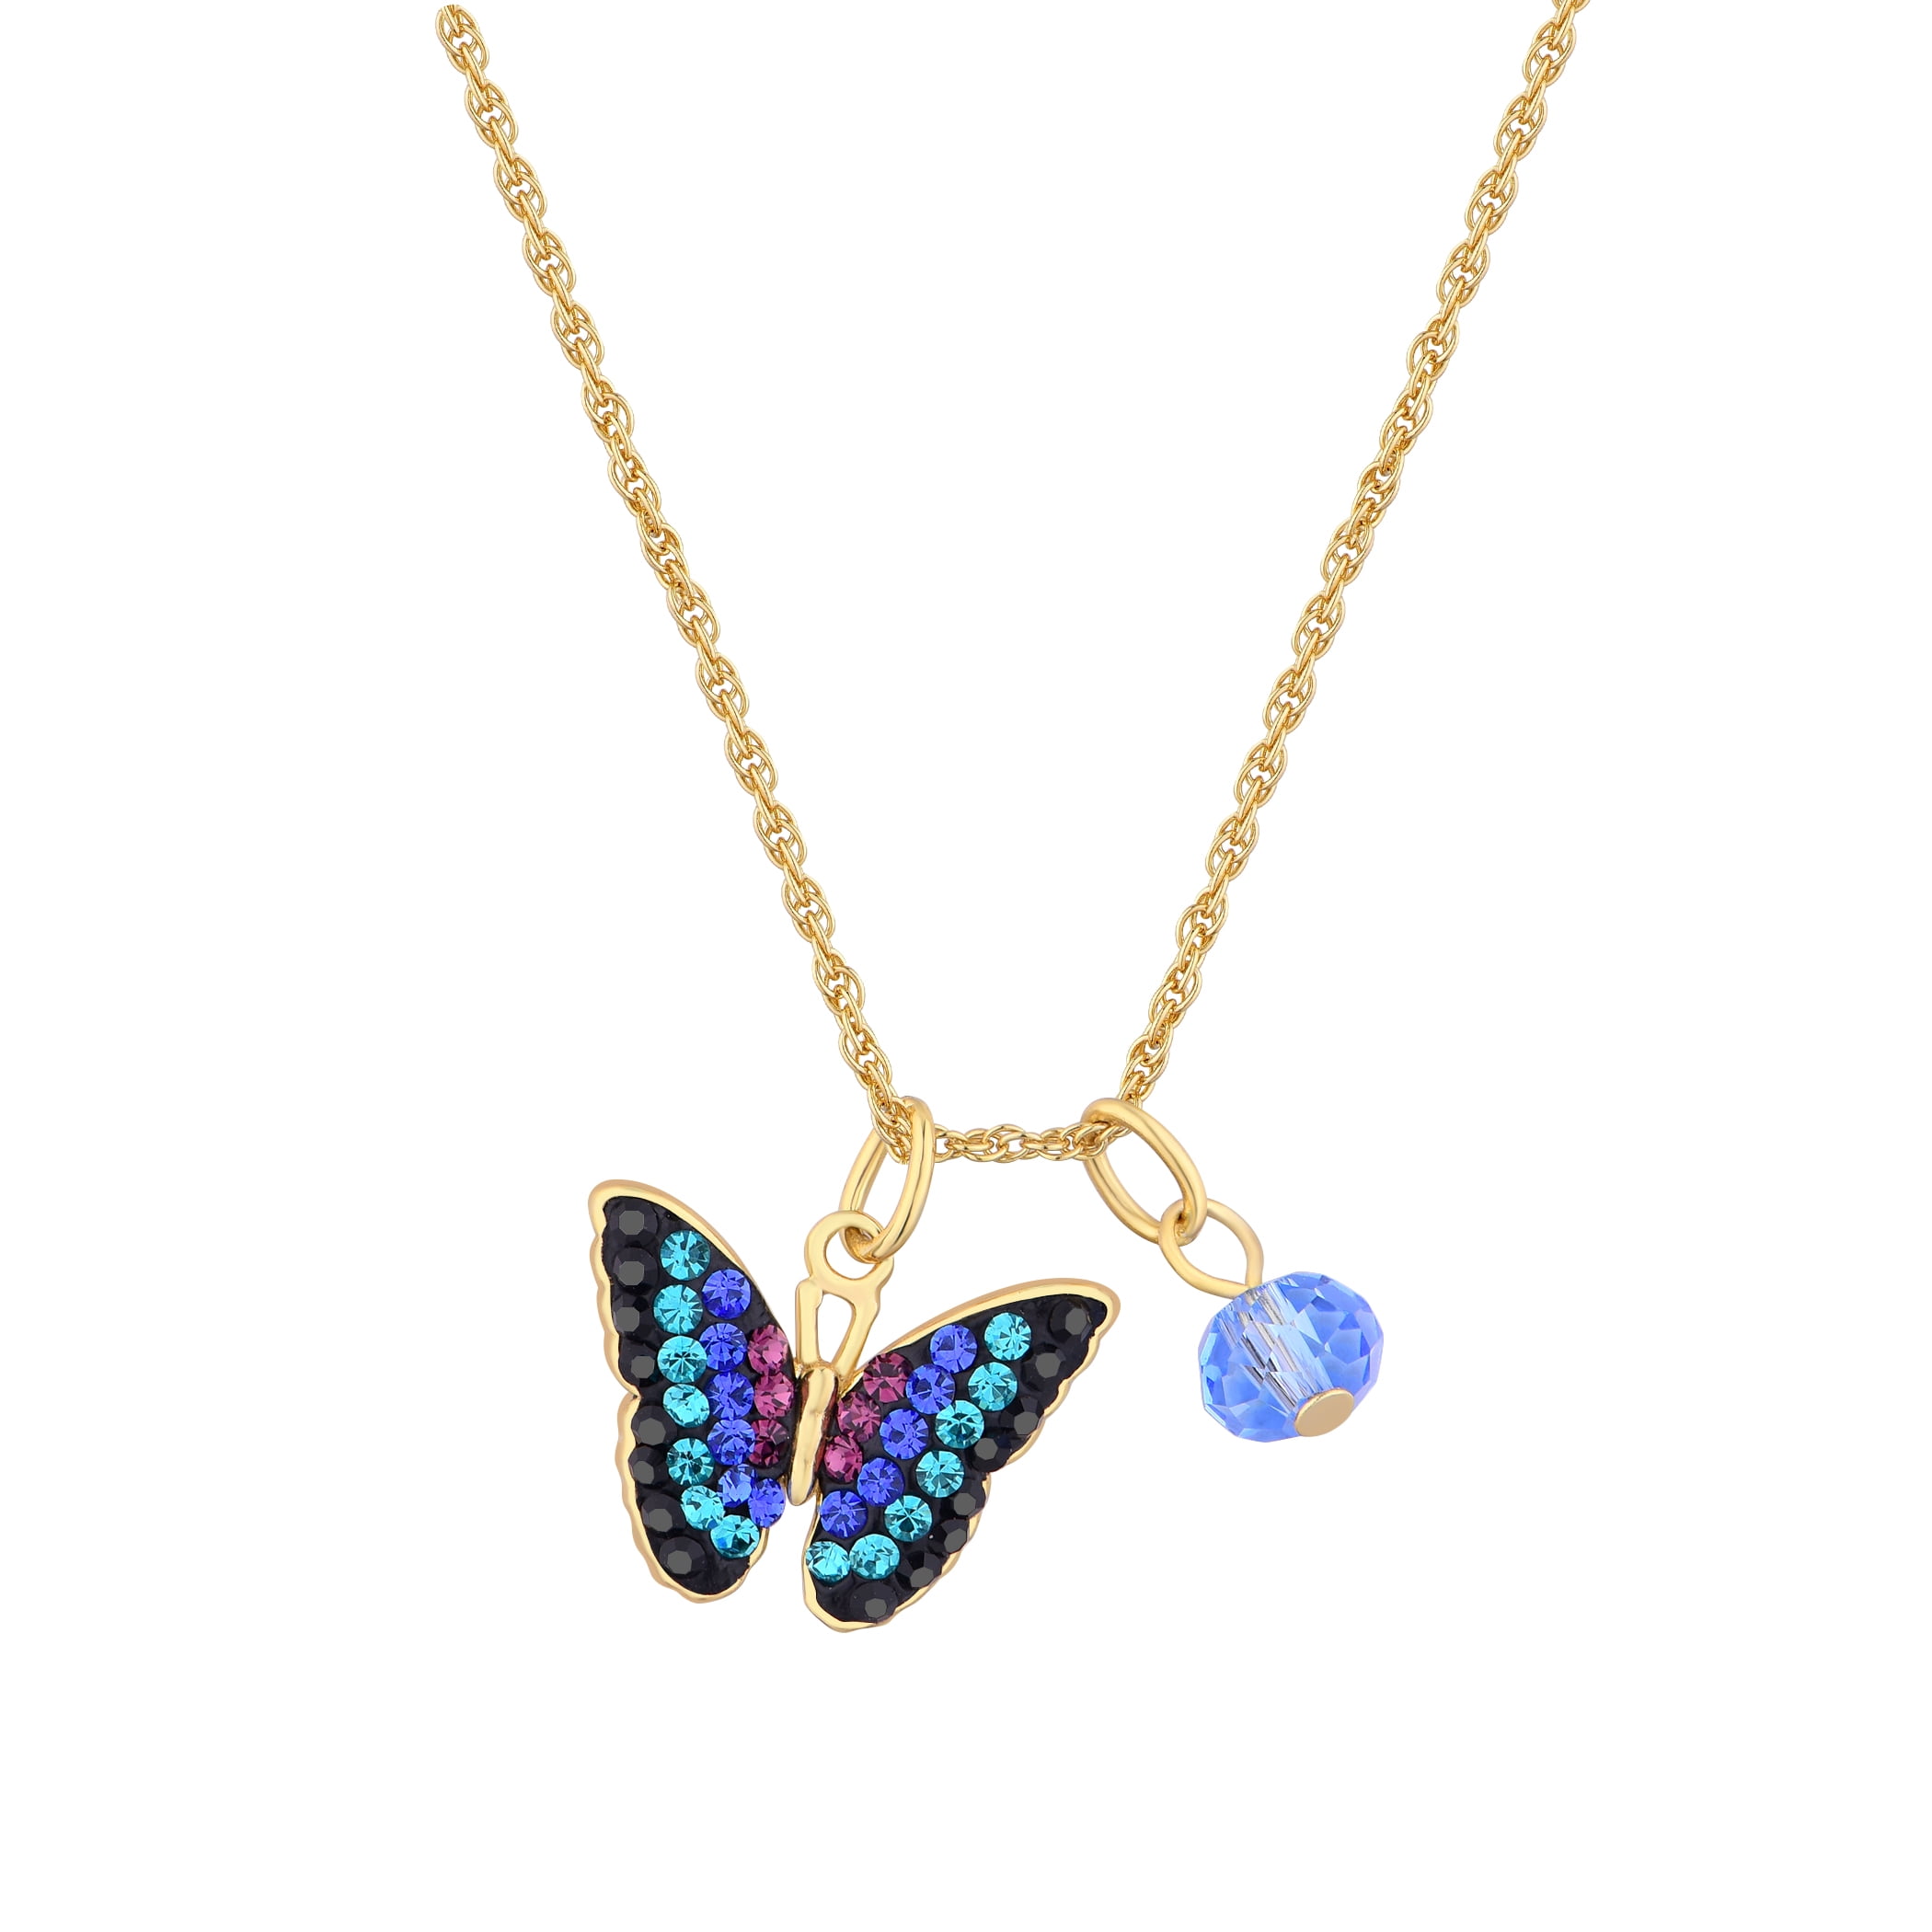 CRYSTAL BUTTERFLY CHAIN PENDANT | SKU:0018711066, 0018711073, 00187110